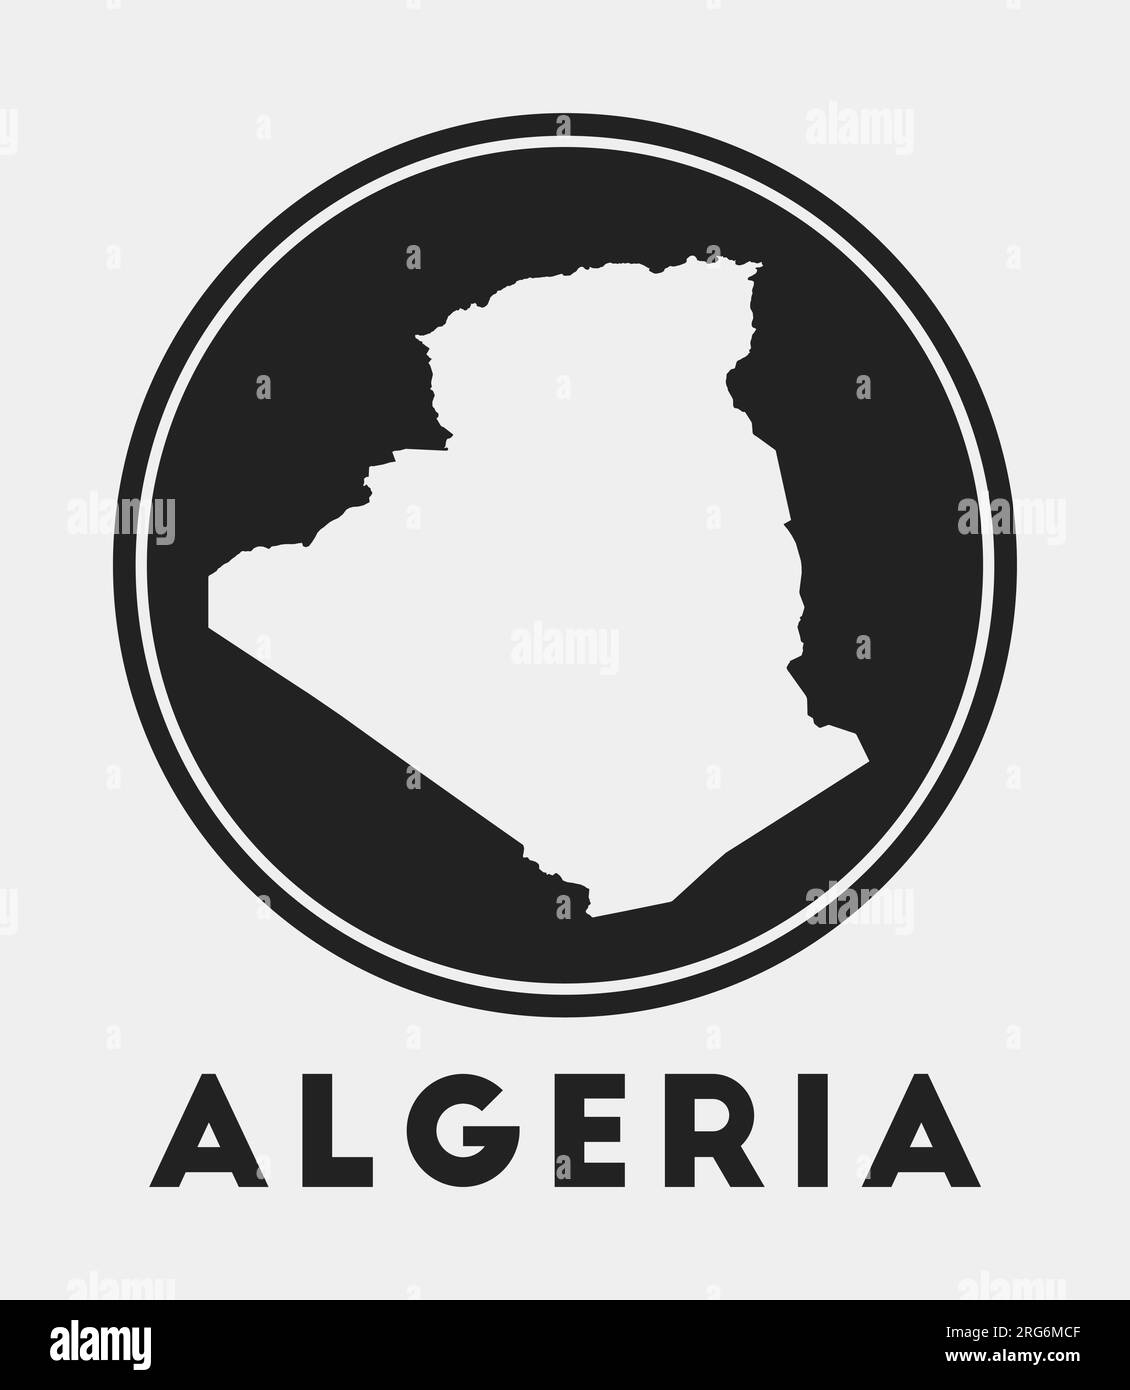 Algeria icon. Round logo with country map and title. Stylish Algeria badge with map. Vector illustration. Stock Vector